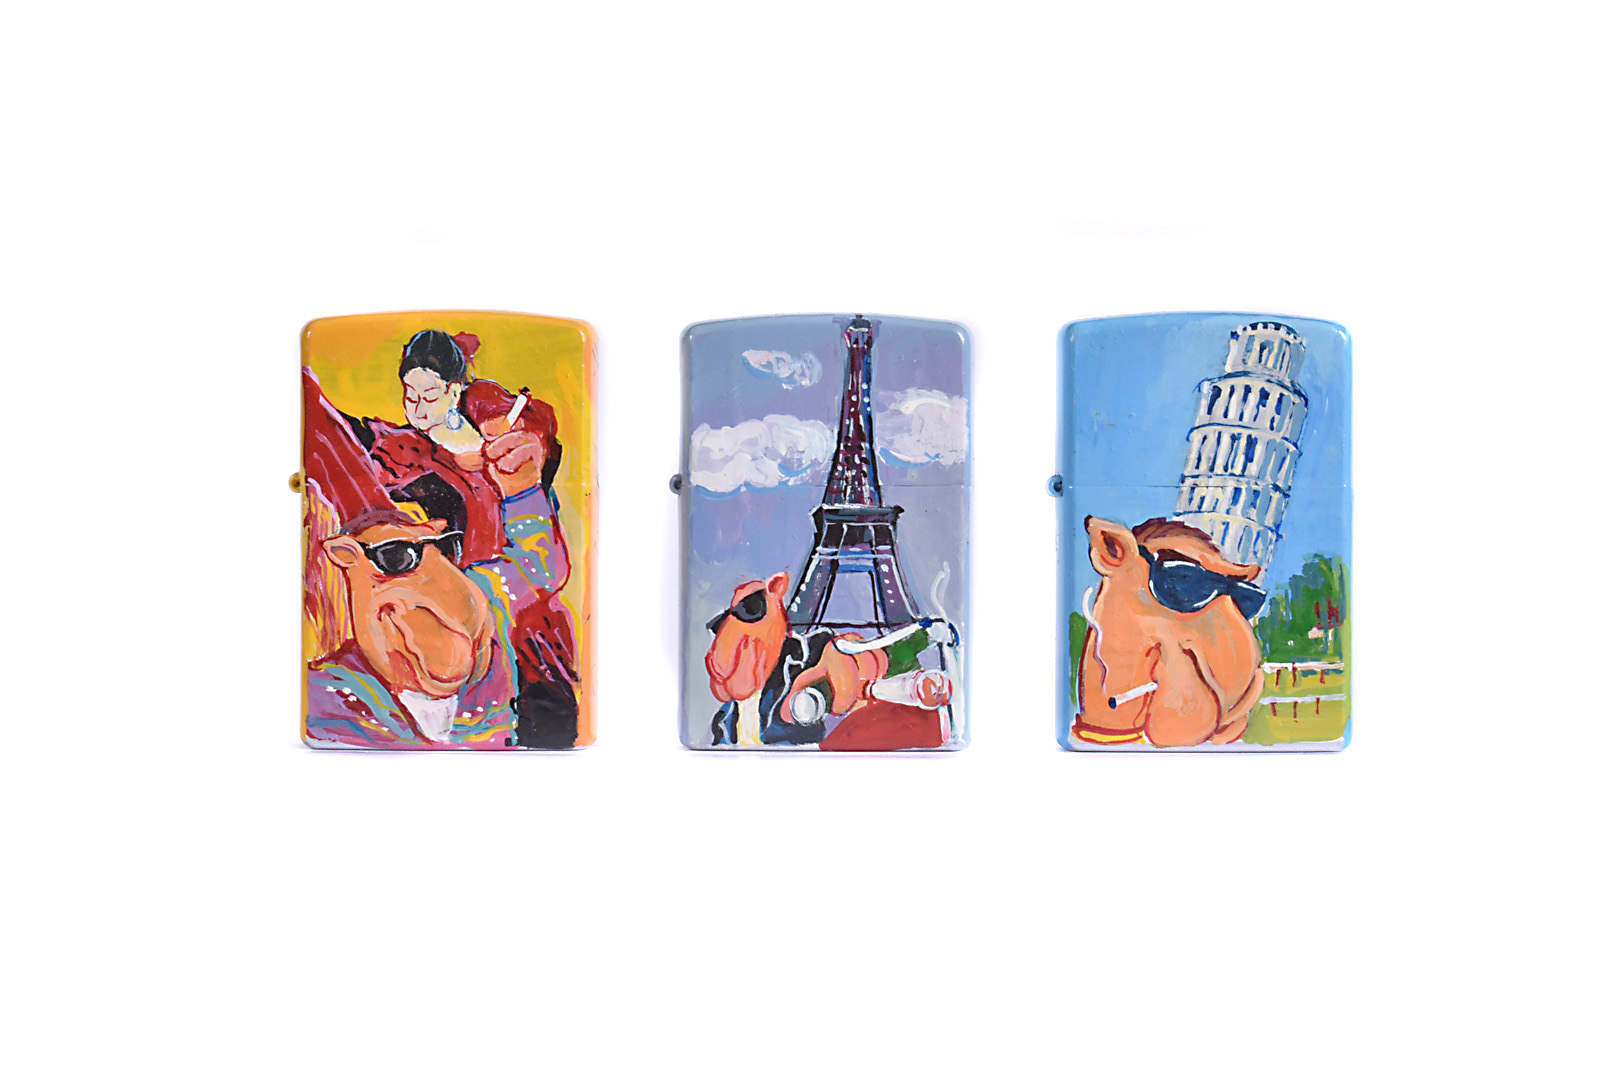 Richard Wallich hand-painted Limited Edition Zippo Lighters, three Limited Edition hand-painted 1/